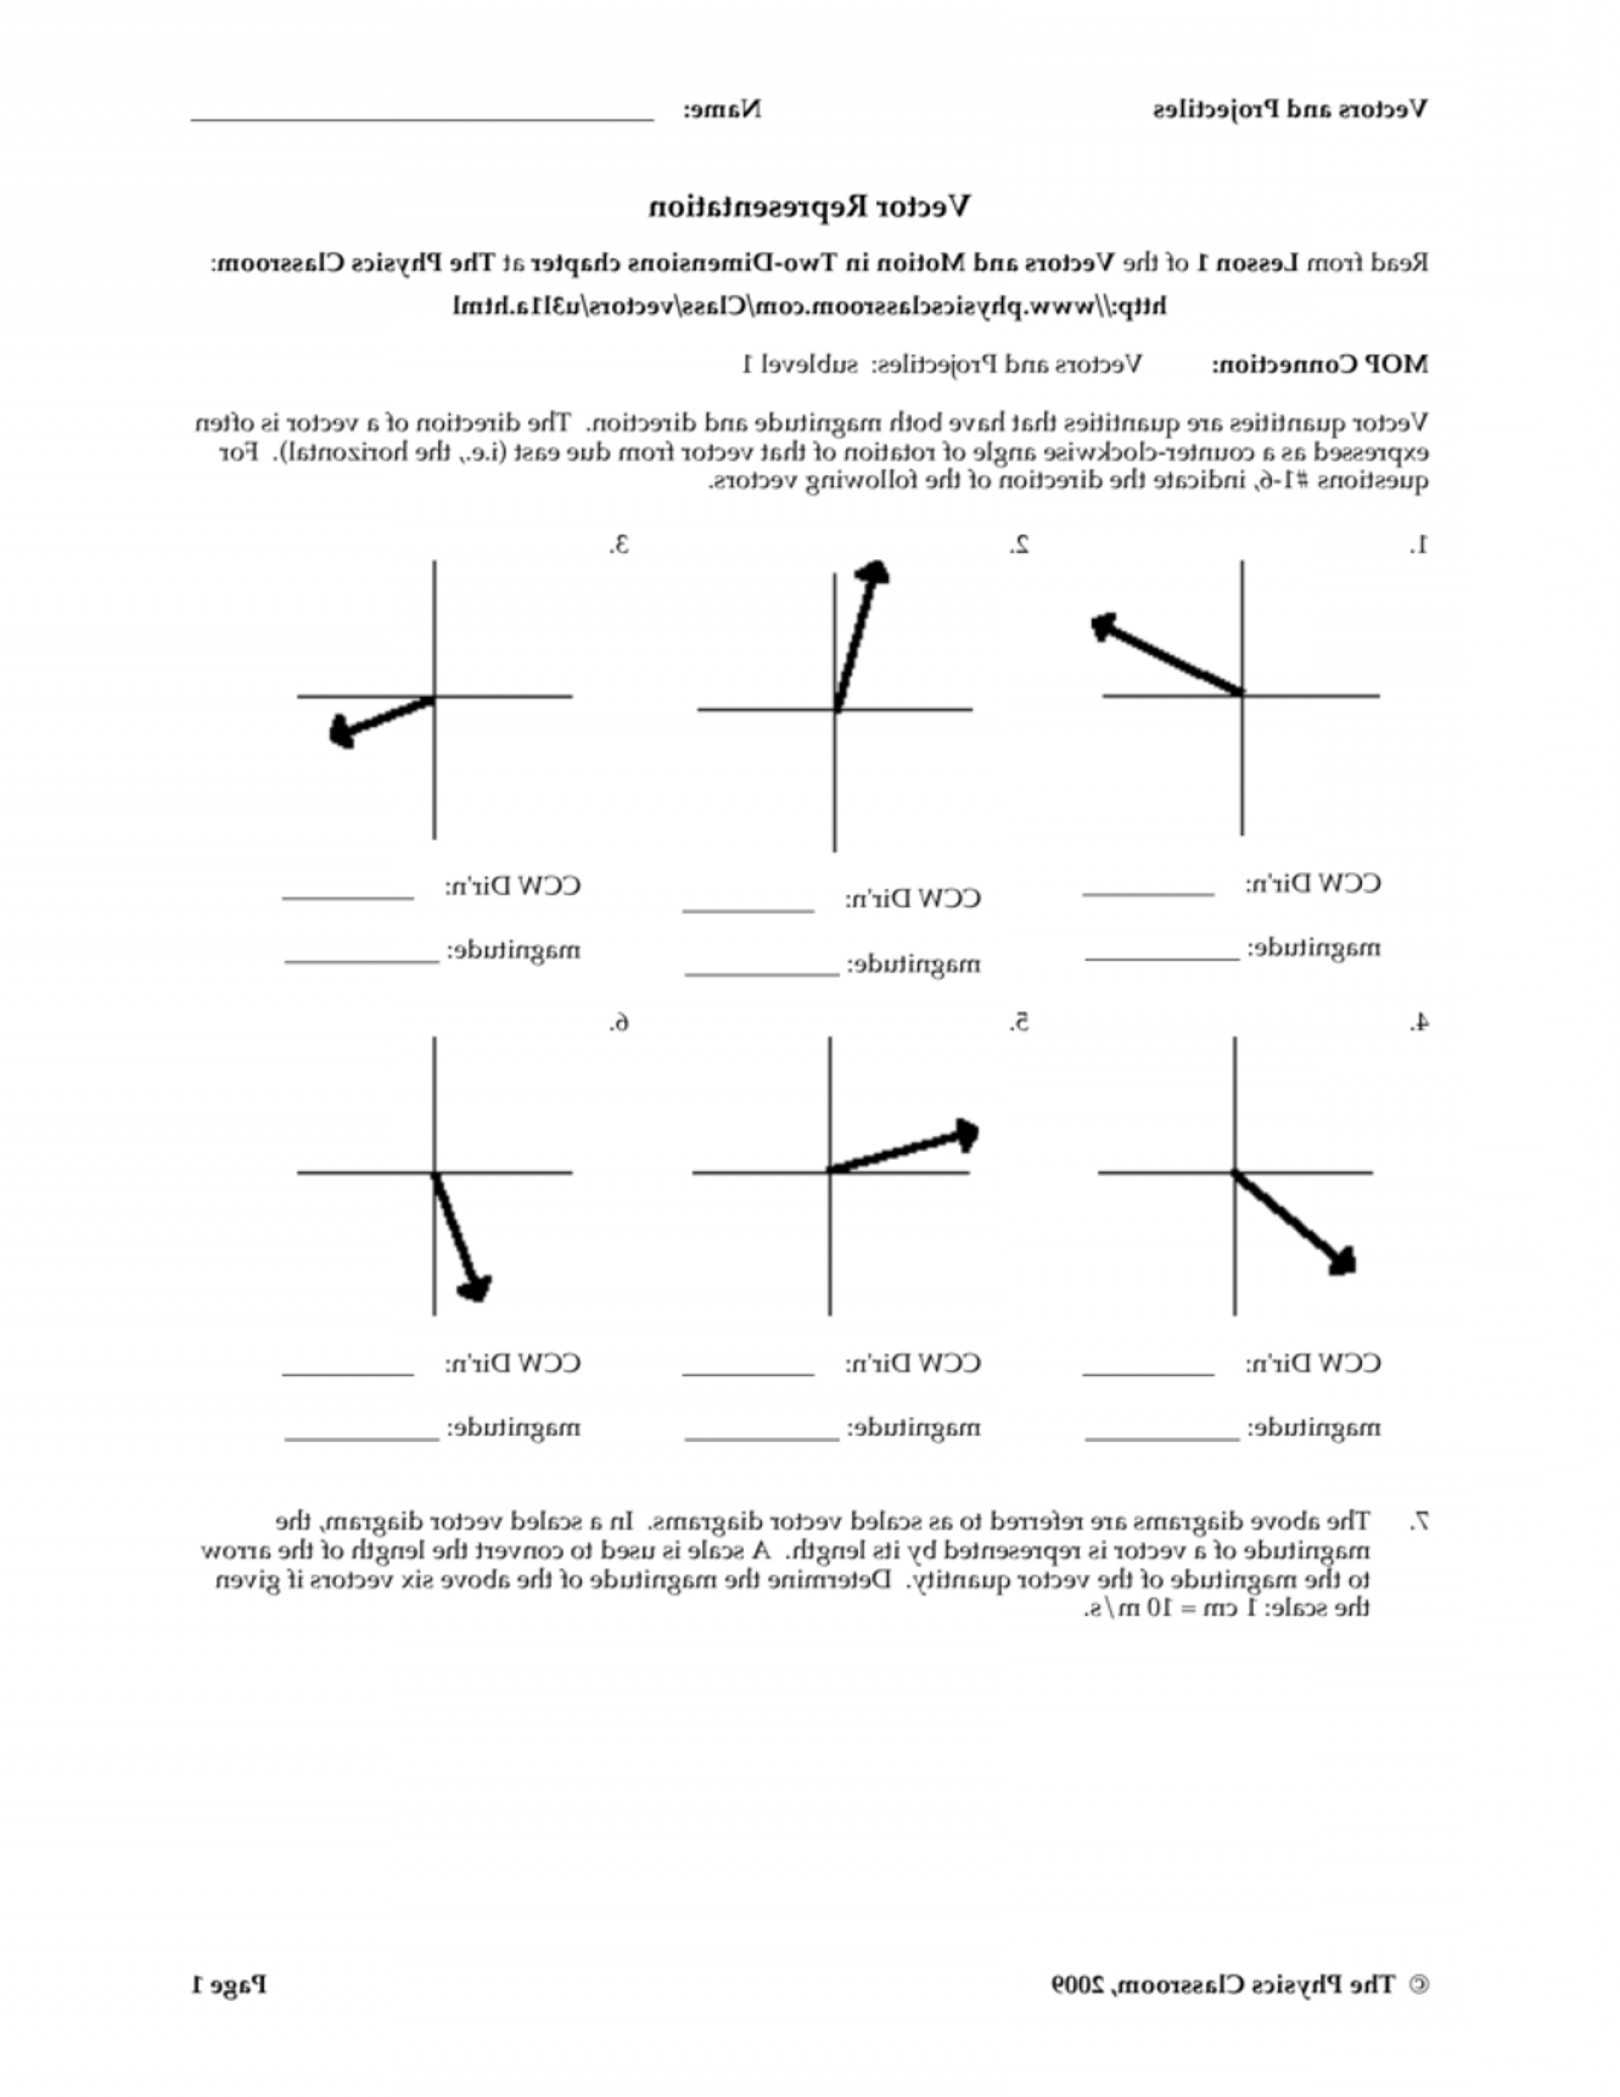 Drawing Free Body Diagrams Worksheet Answers Physics Classroom Also Vector Resolution Worksheet